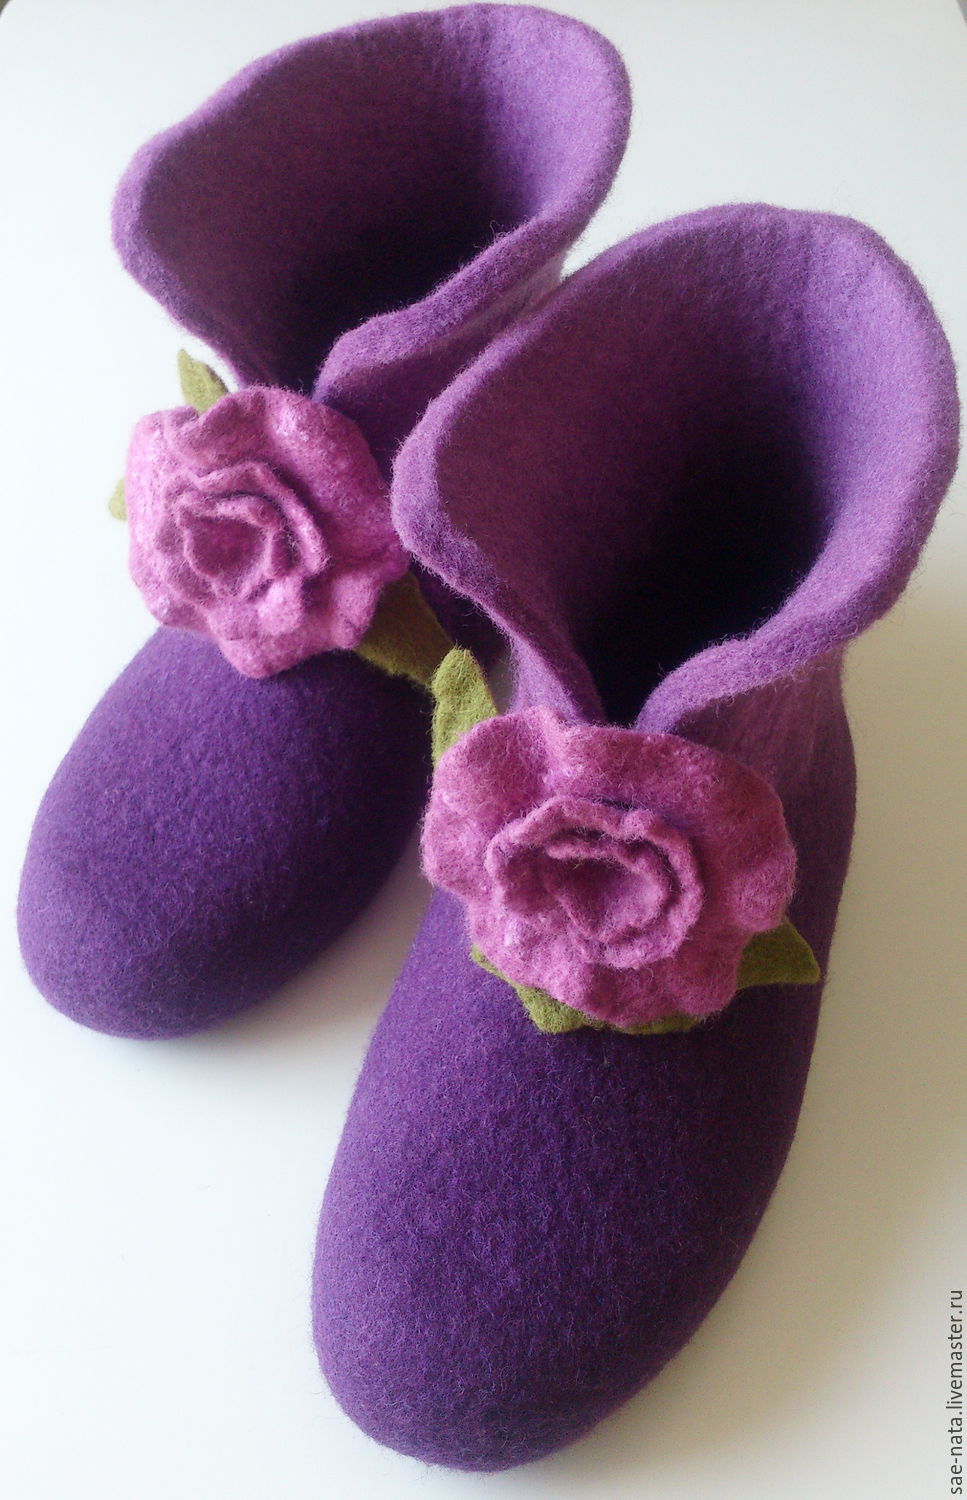 Boots home warm. Women photo. Felted boots for women.Boots made of felt to buy. Short women's boots buy.
